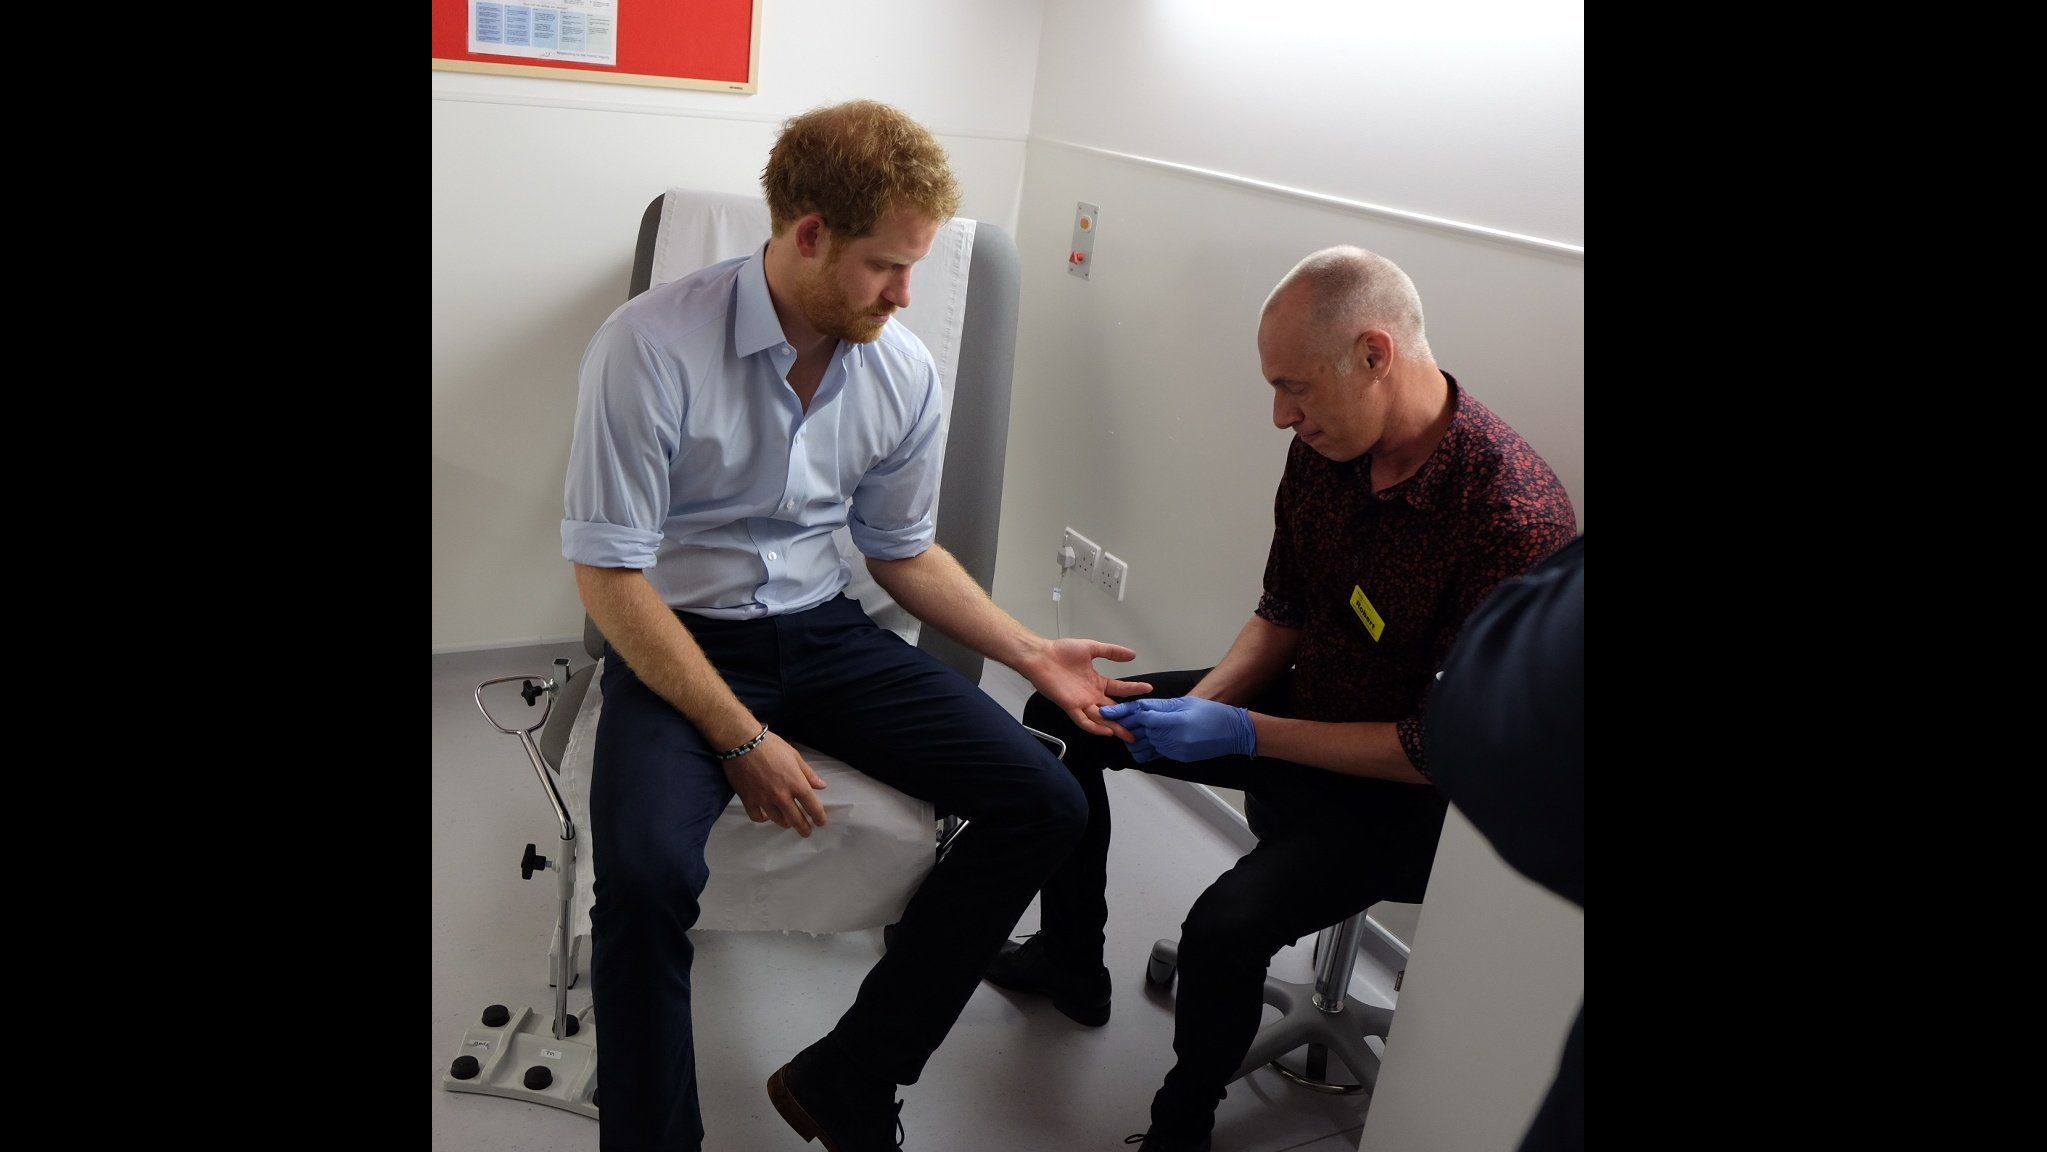 Prince Harry gets tested Thursday for HIV by Robert Palmer at a London clinic.